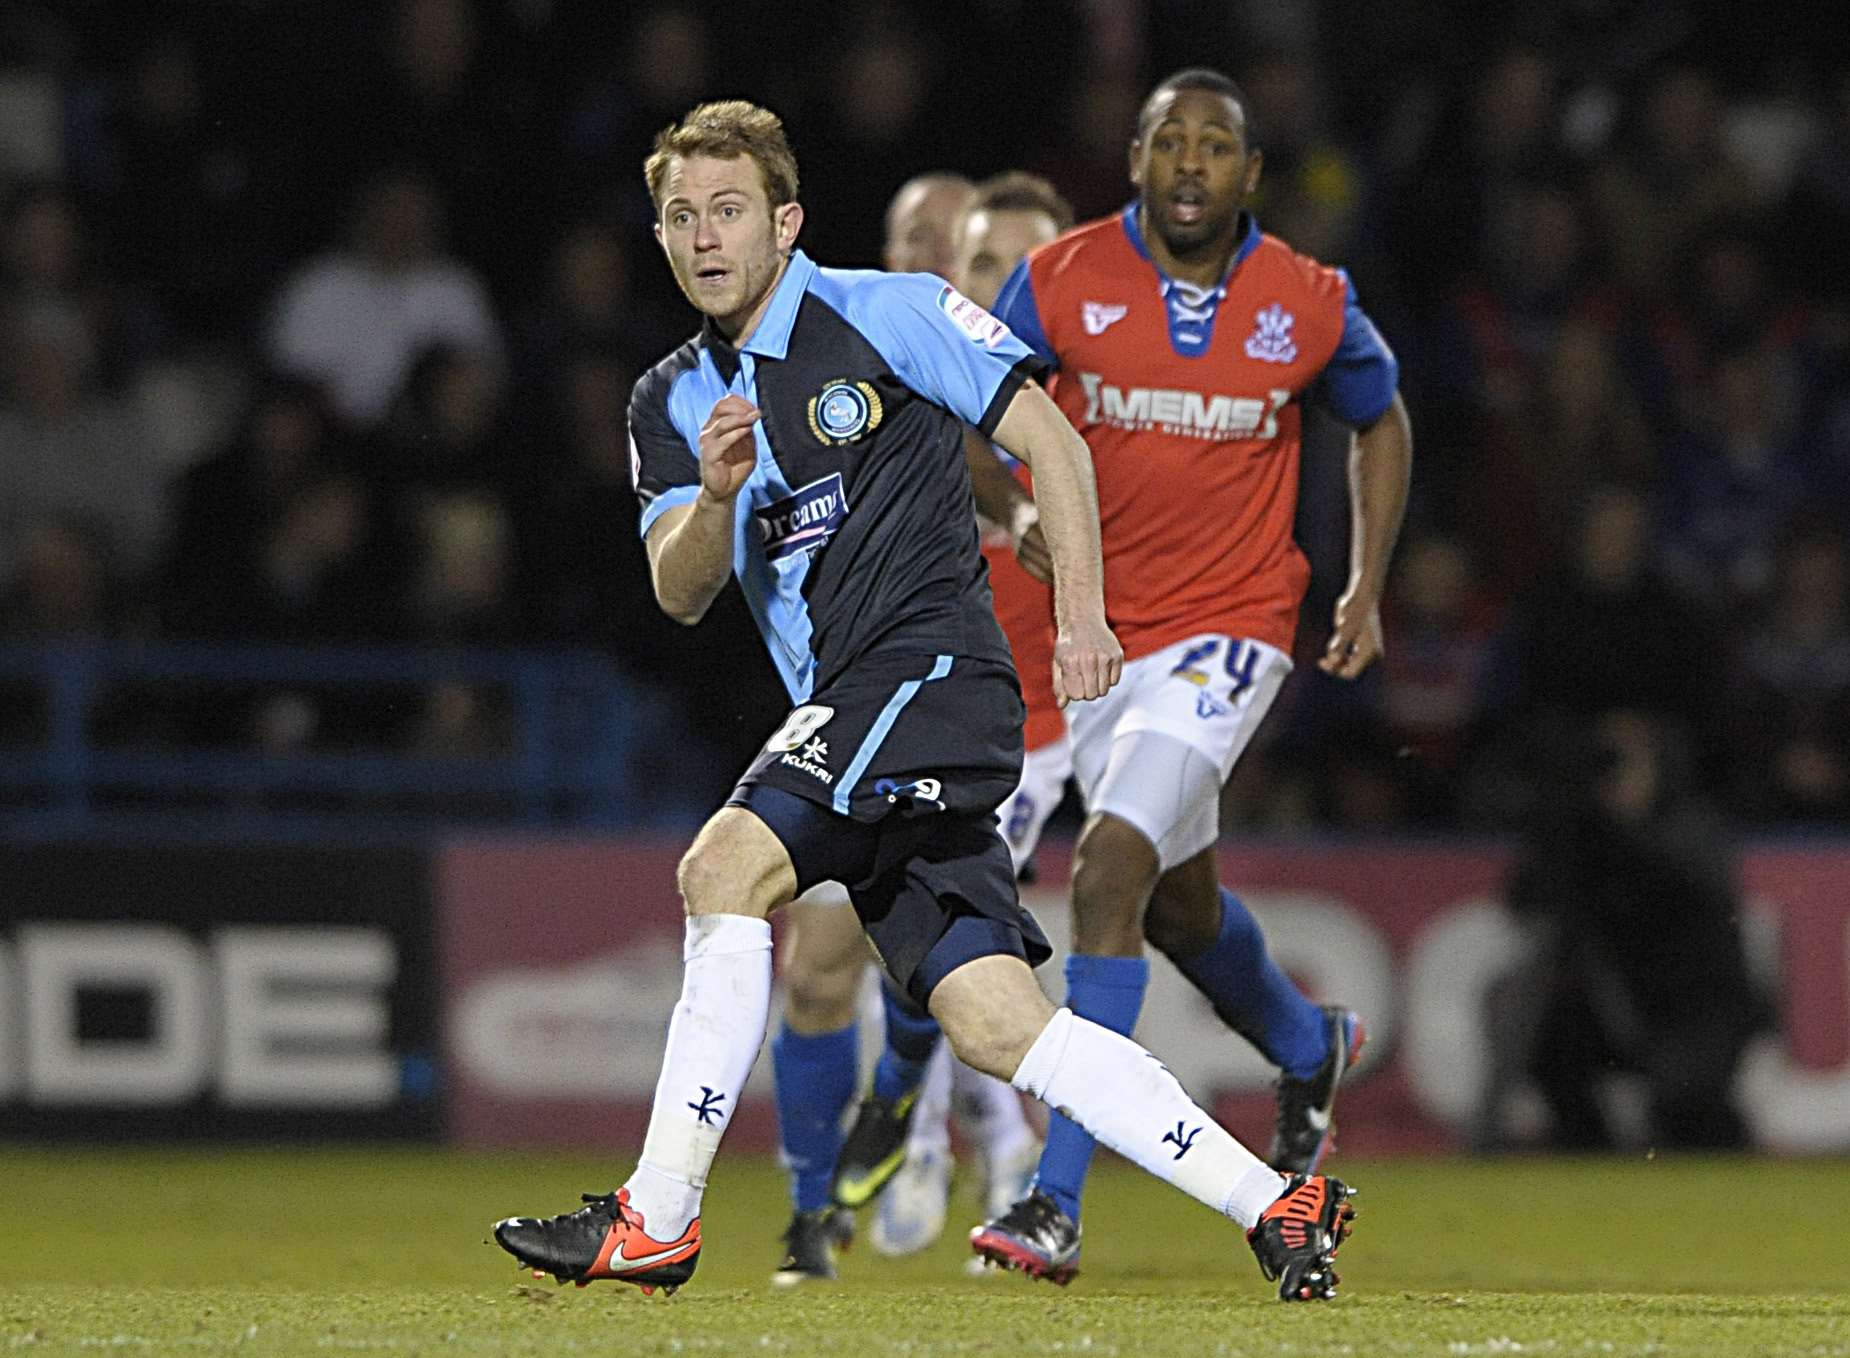 Stuart Lewis playing for Wycombe against Gillingham Picture: Barry Goodwin